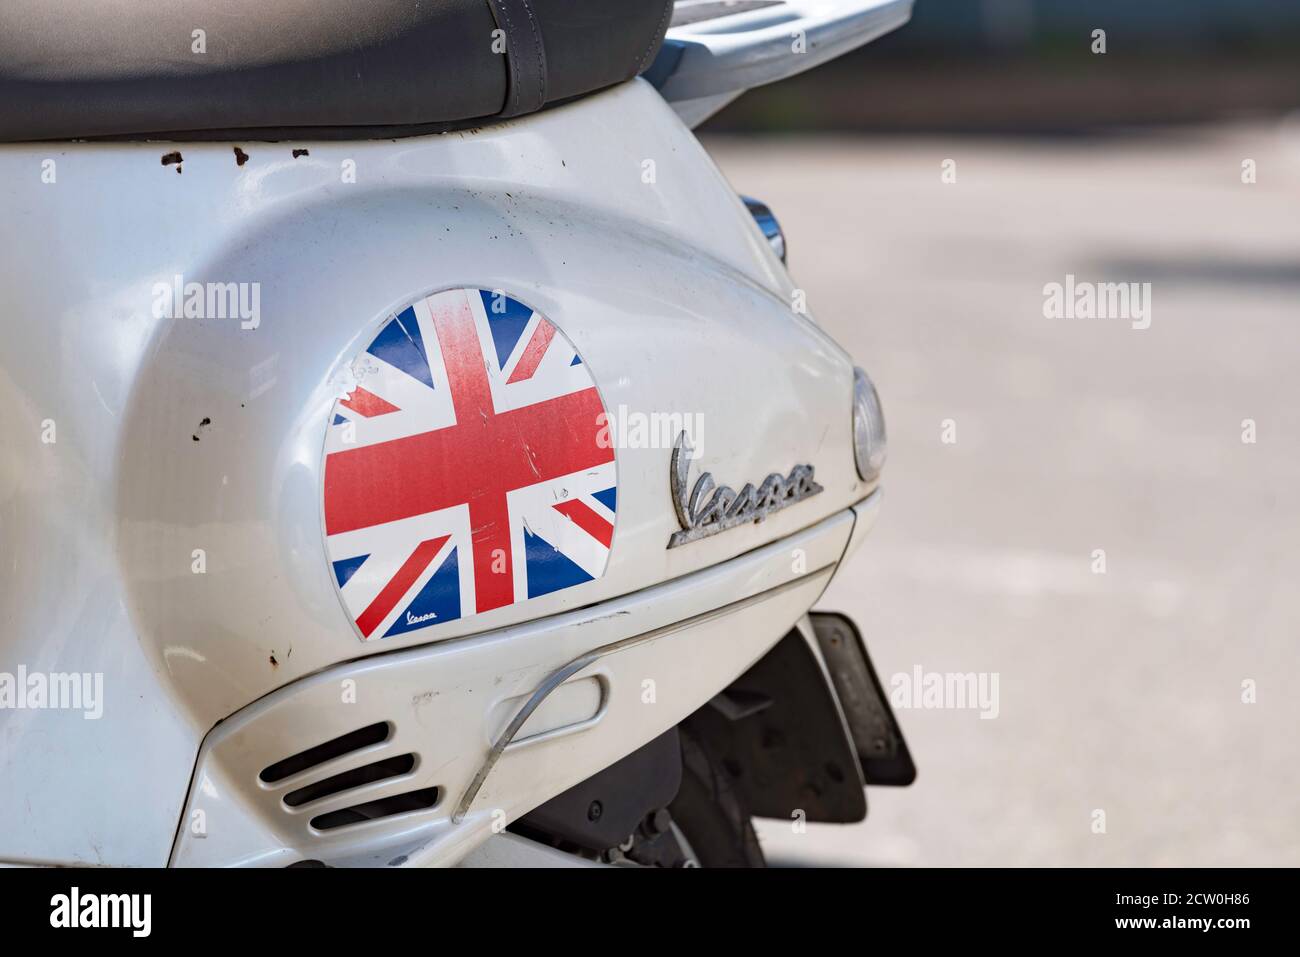 A slightly faded Union Jack sticker or decal on the rear wheel mudguard of a Vespa motor scooter in Sydney, Australia Stock Photo